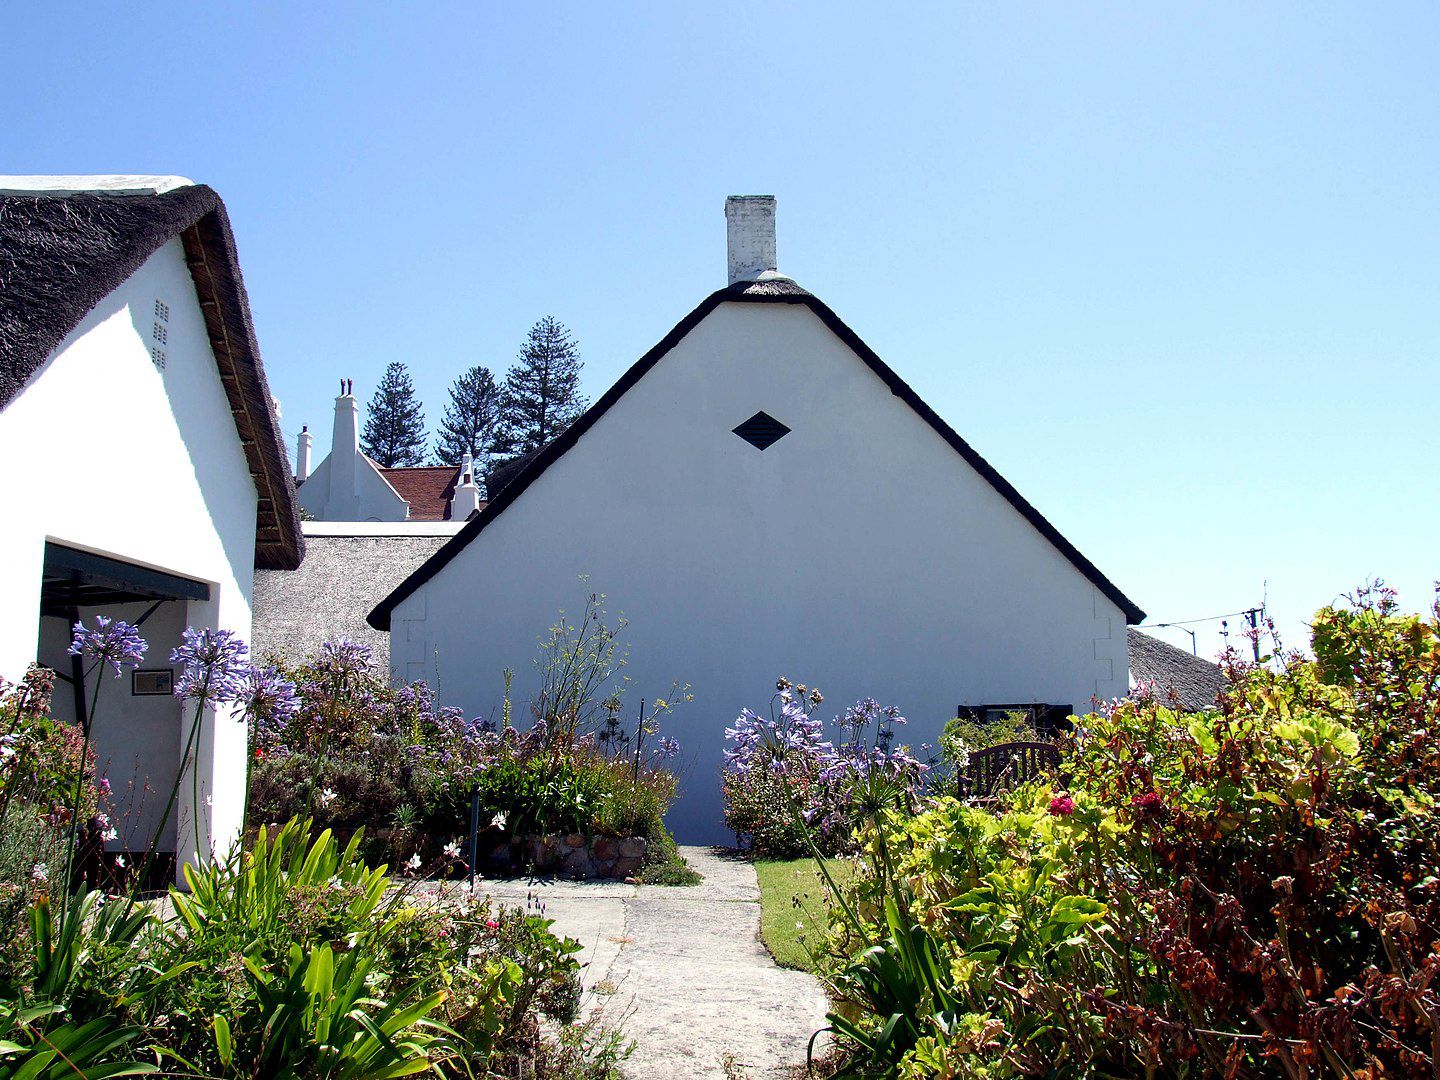  Rhodes Cottage Museum and Tea Room